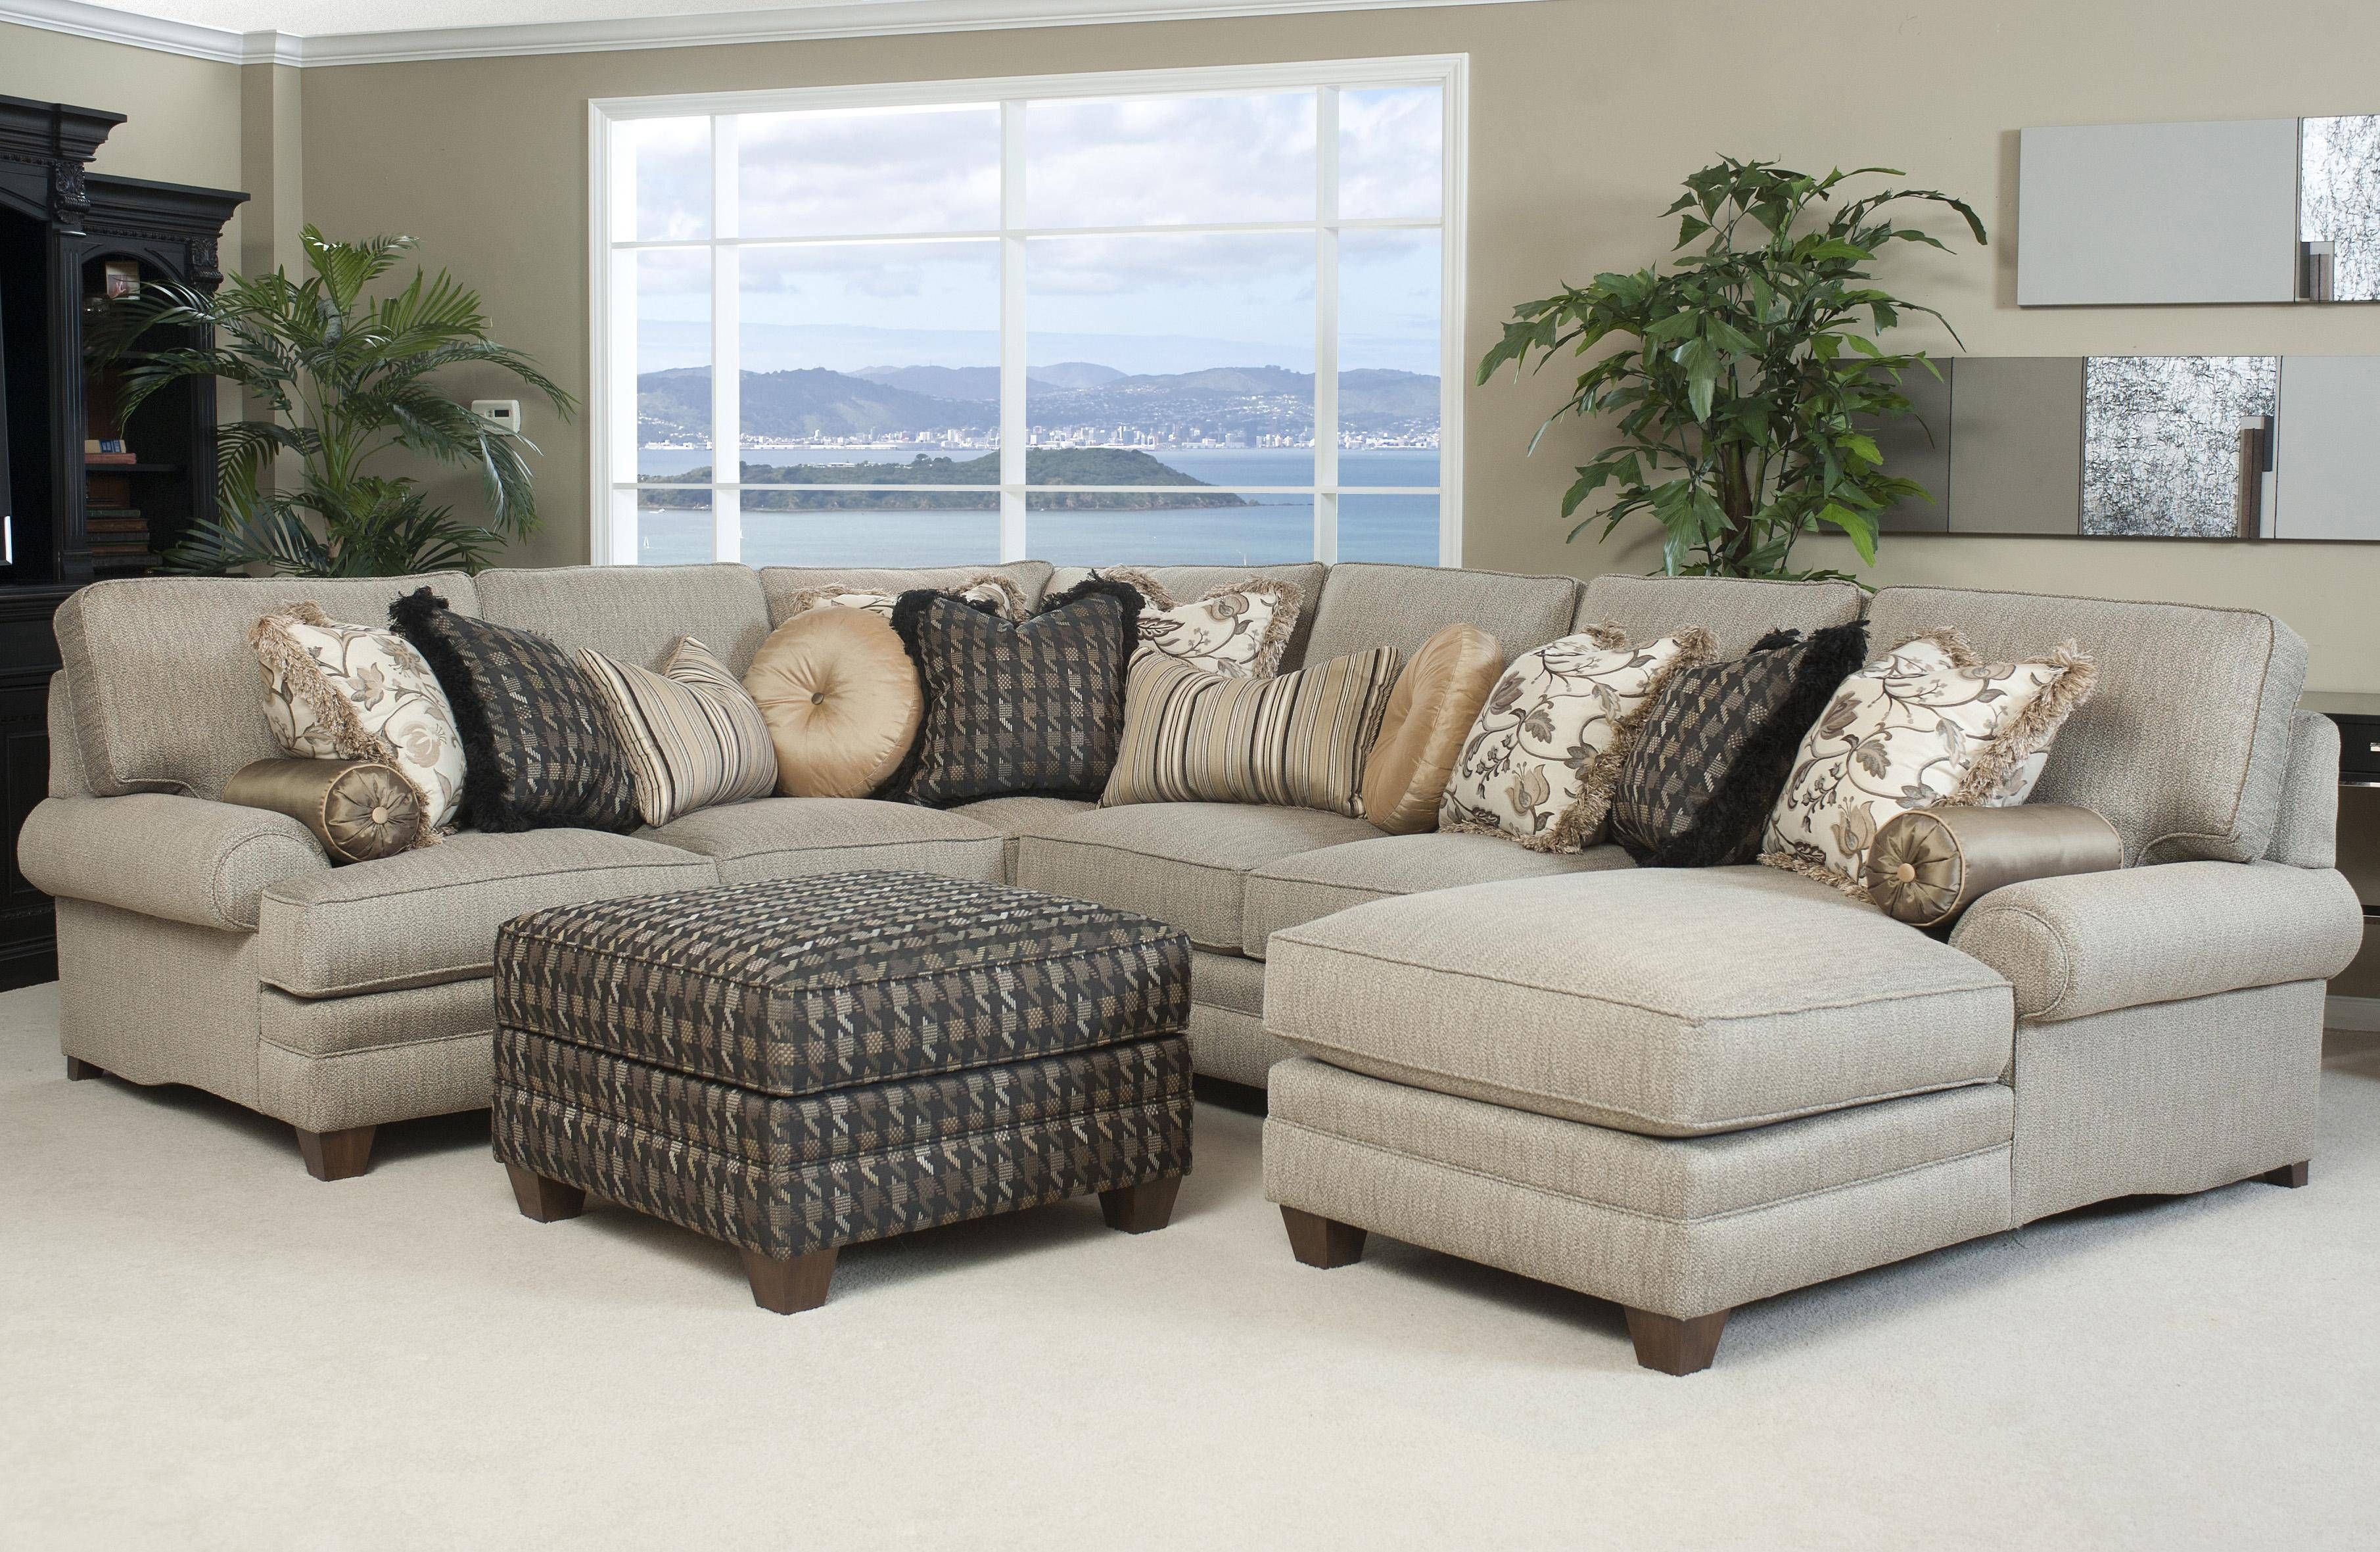 Traditional Styled Sectional Sofa With Comfortable Pillowed Seat With Cream Sectional Leather Sofas (View 7 of 12)